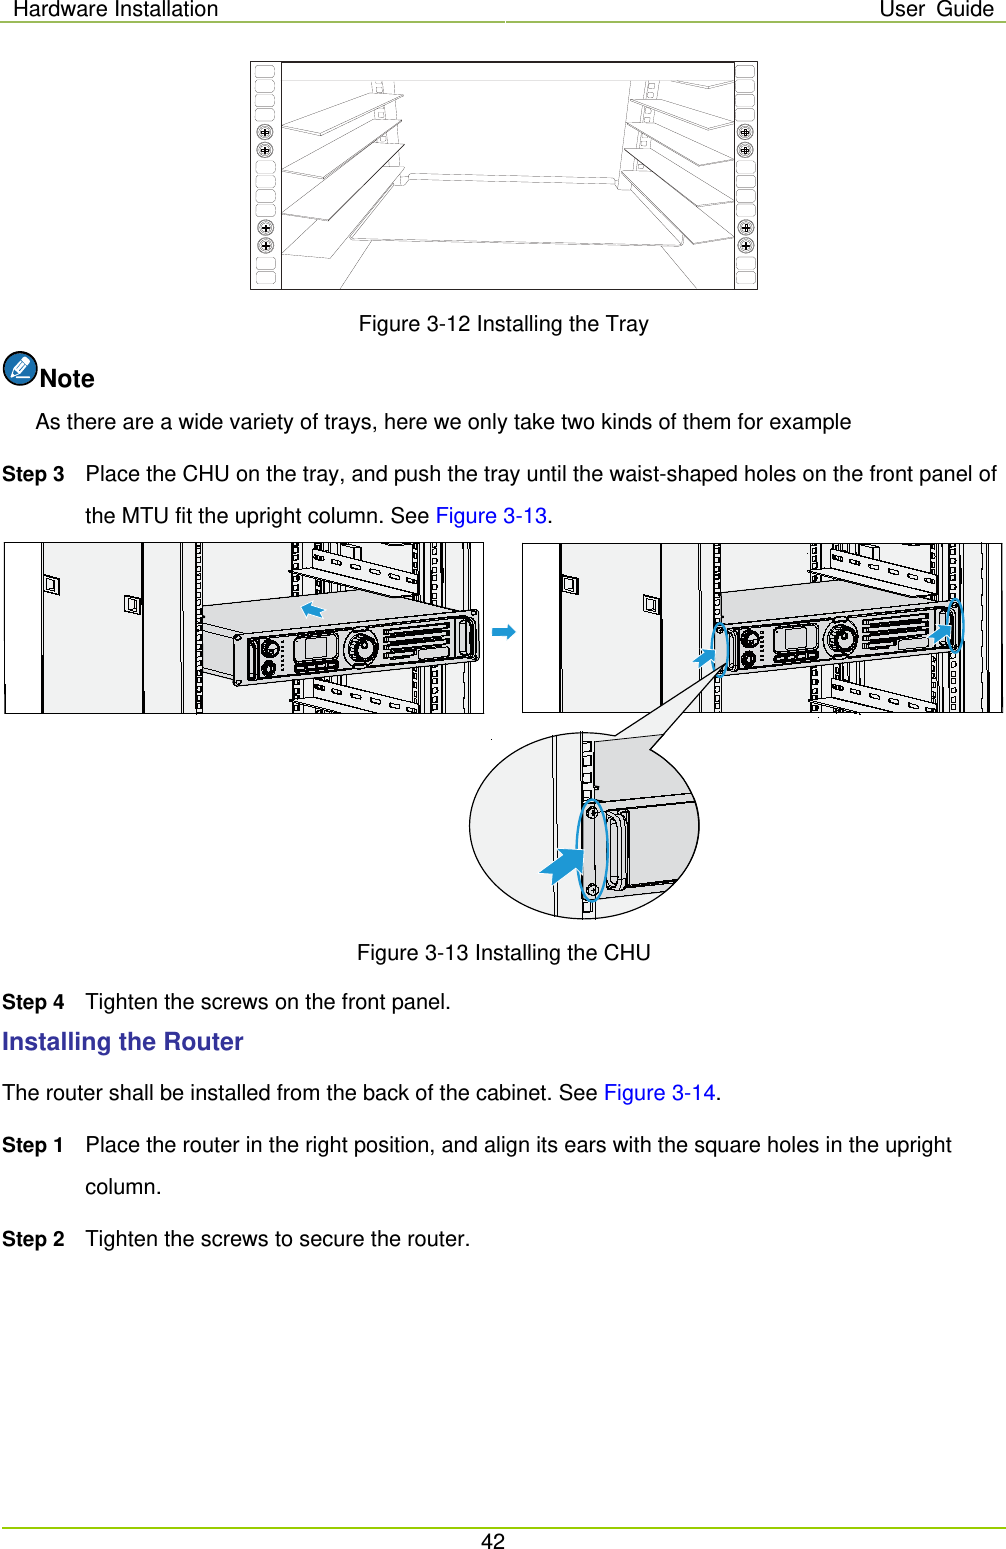 Hardware Installation User Guide  42   Figure 3-12 Installing the Tray Note As there are a wide variety of trays, here we only take two kinds of them for example Step 3 Place the CHU on the tray, and push the tray until the waist-shaped holes on the front panel of the MTU fit the upright column. See Figure 3-13.  Figure 3-13 Installing the CHU Step 4 Tighten the screws on the front panel.   Installing the Router The router shall be installed from the back of the cabinet. See Figure 3-14. Step 1 Place the router in the right position, and align its ears with the square holes in the upright column. Step 2 Tighten the screws to secure the router. 